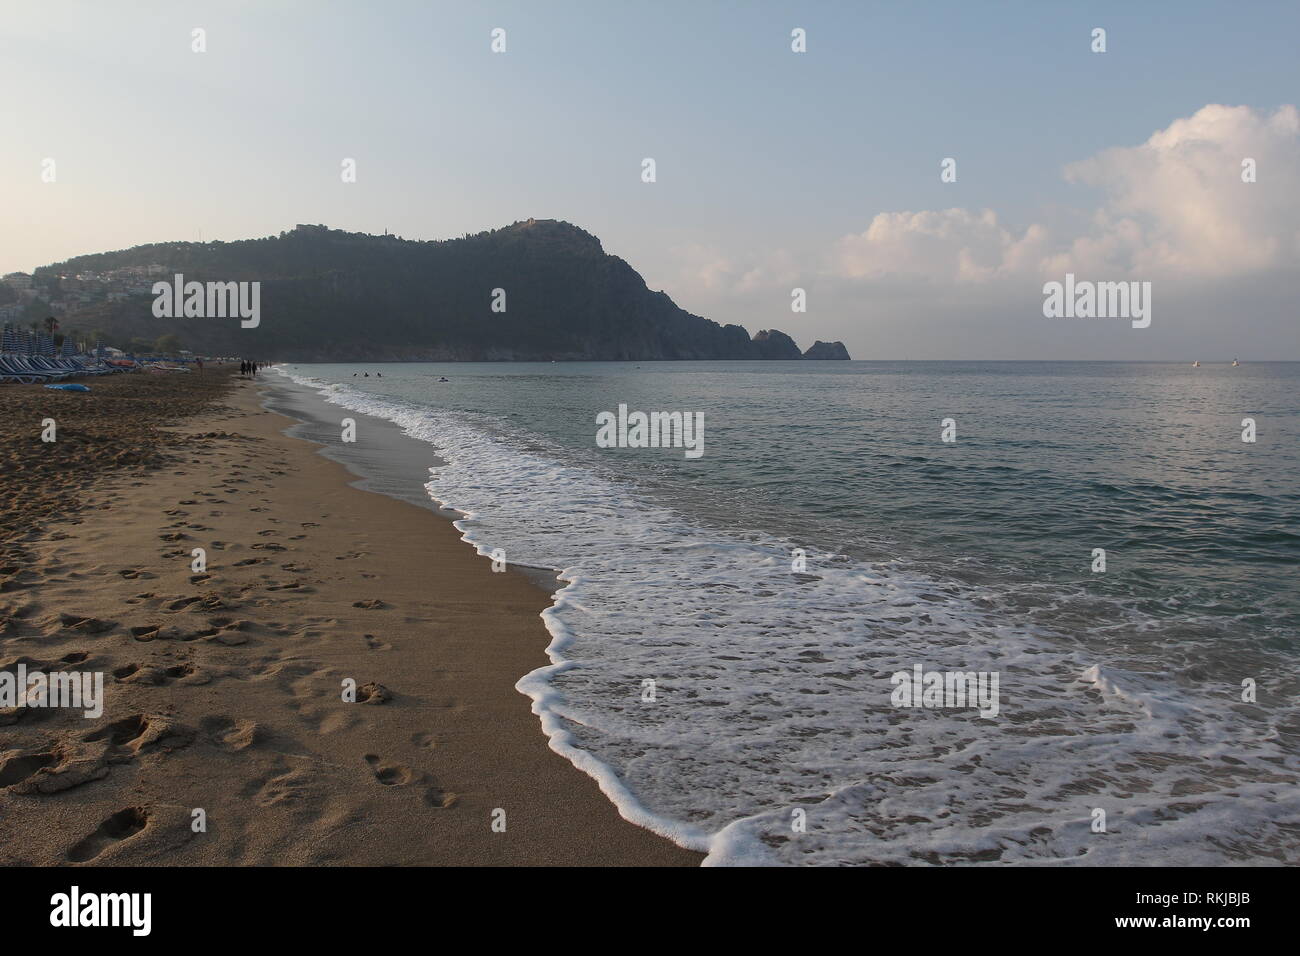 Alanya - the beach of Cleopatra / Alanya is one of most popular seaside resorts in Turkey Stock Photo